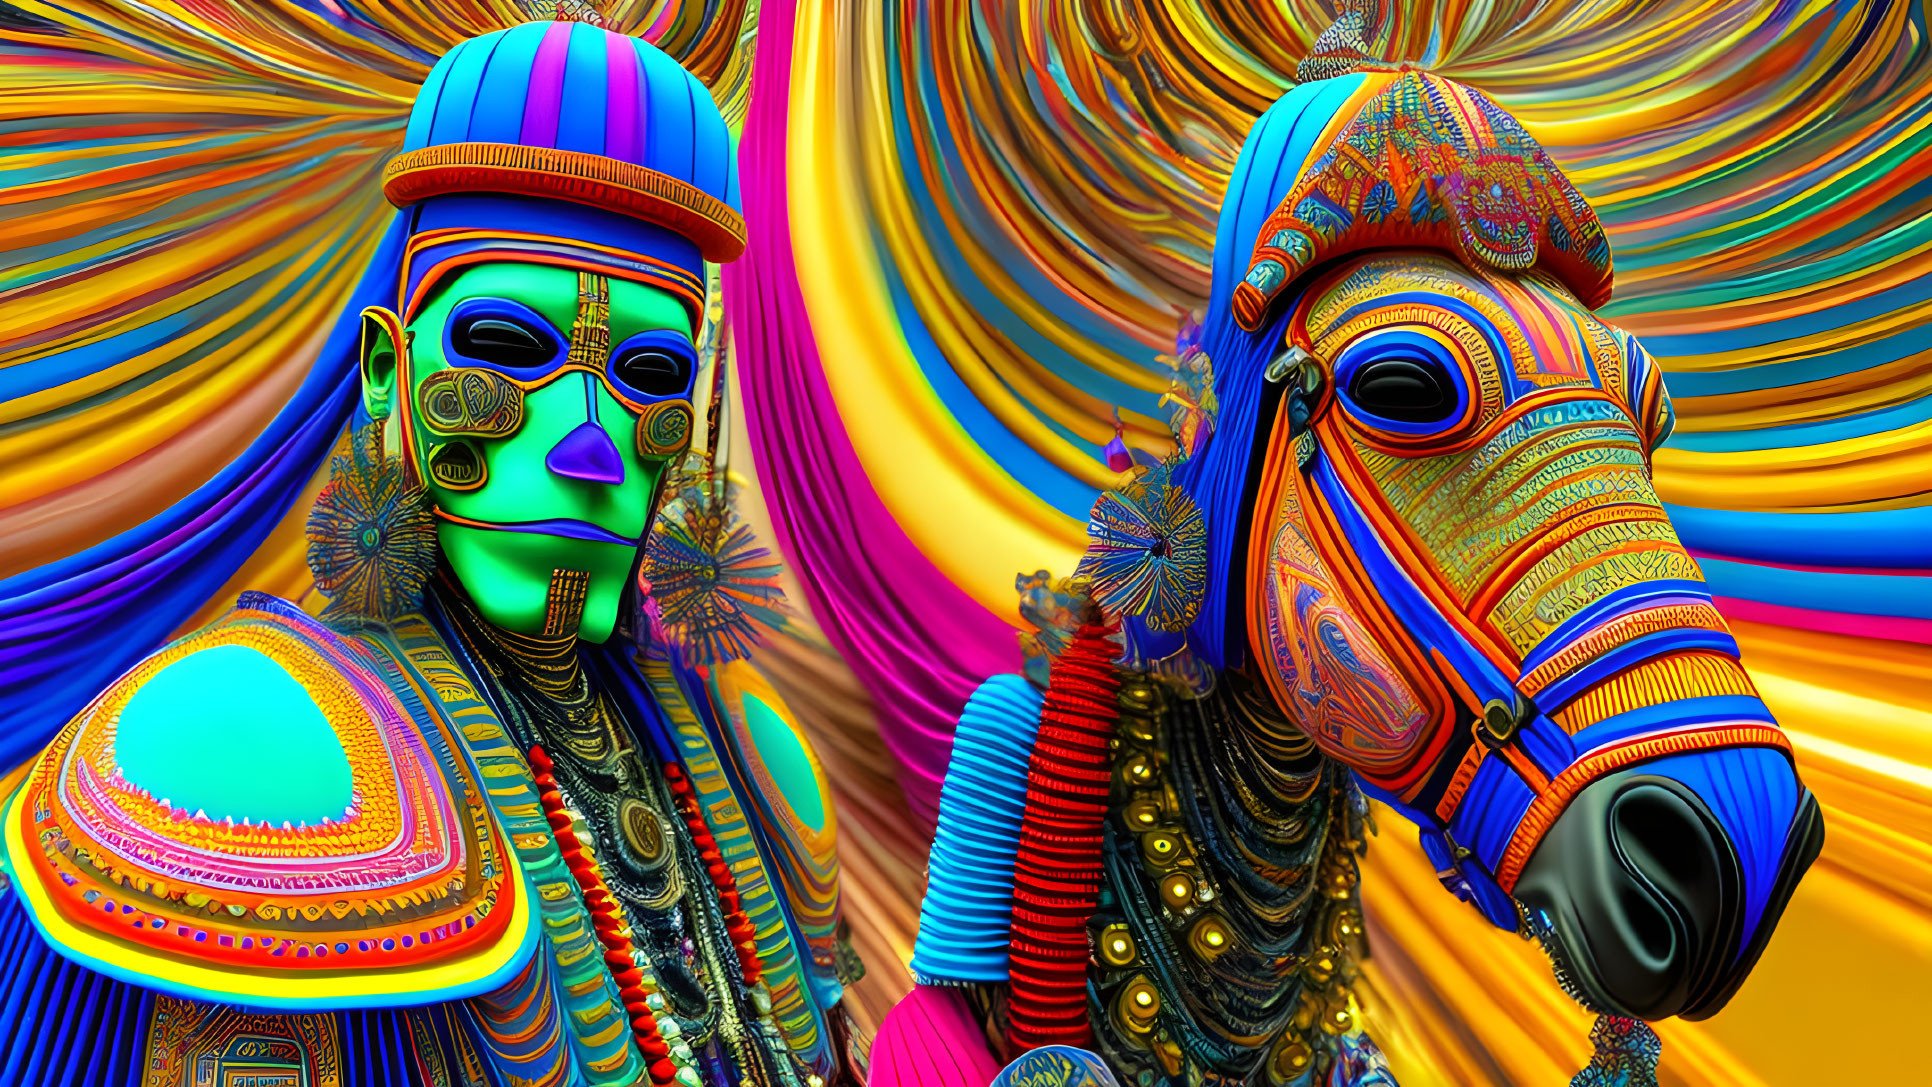 Vibrant digital art: stylized figure and horse-like creature with intricate patterns